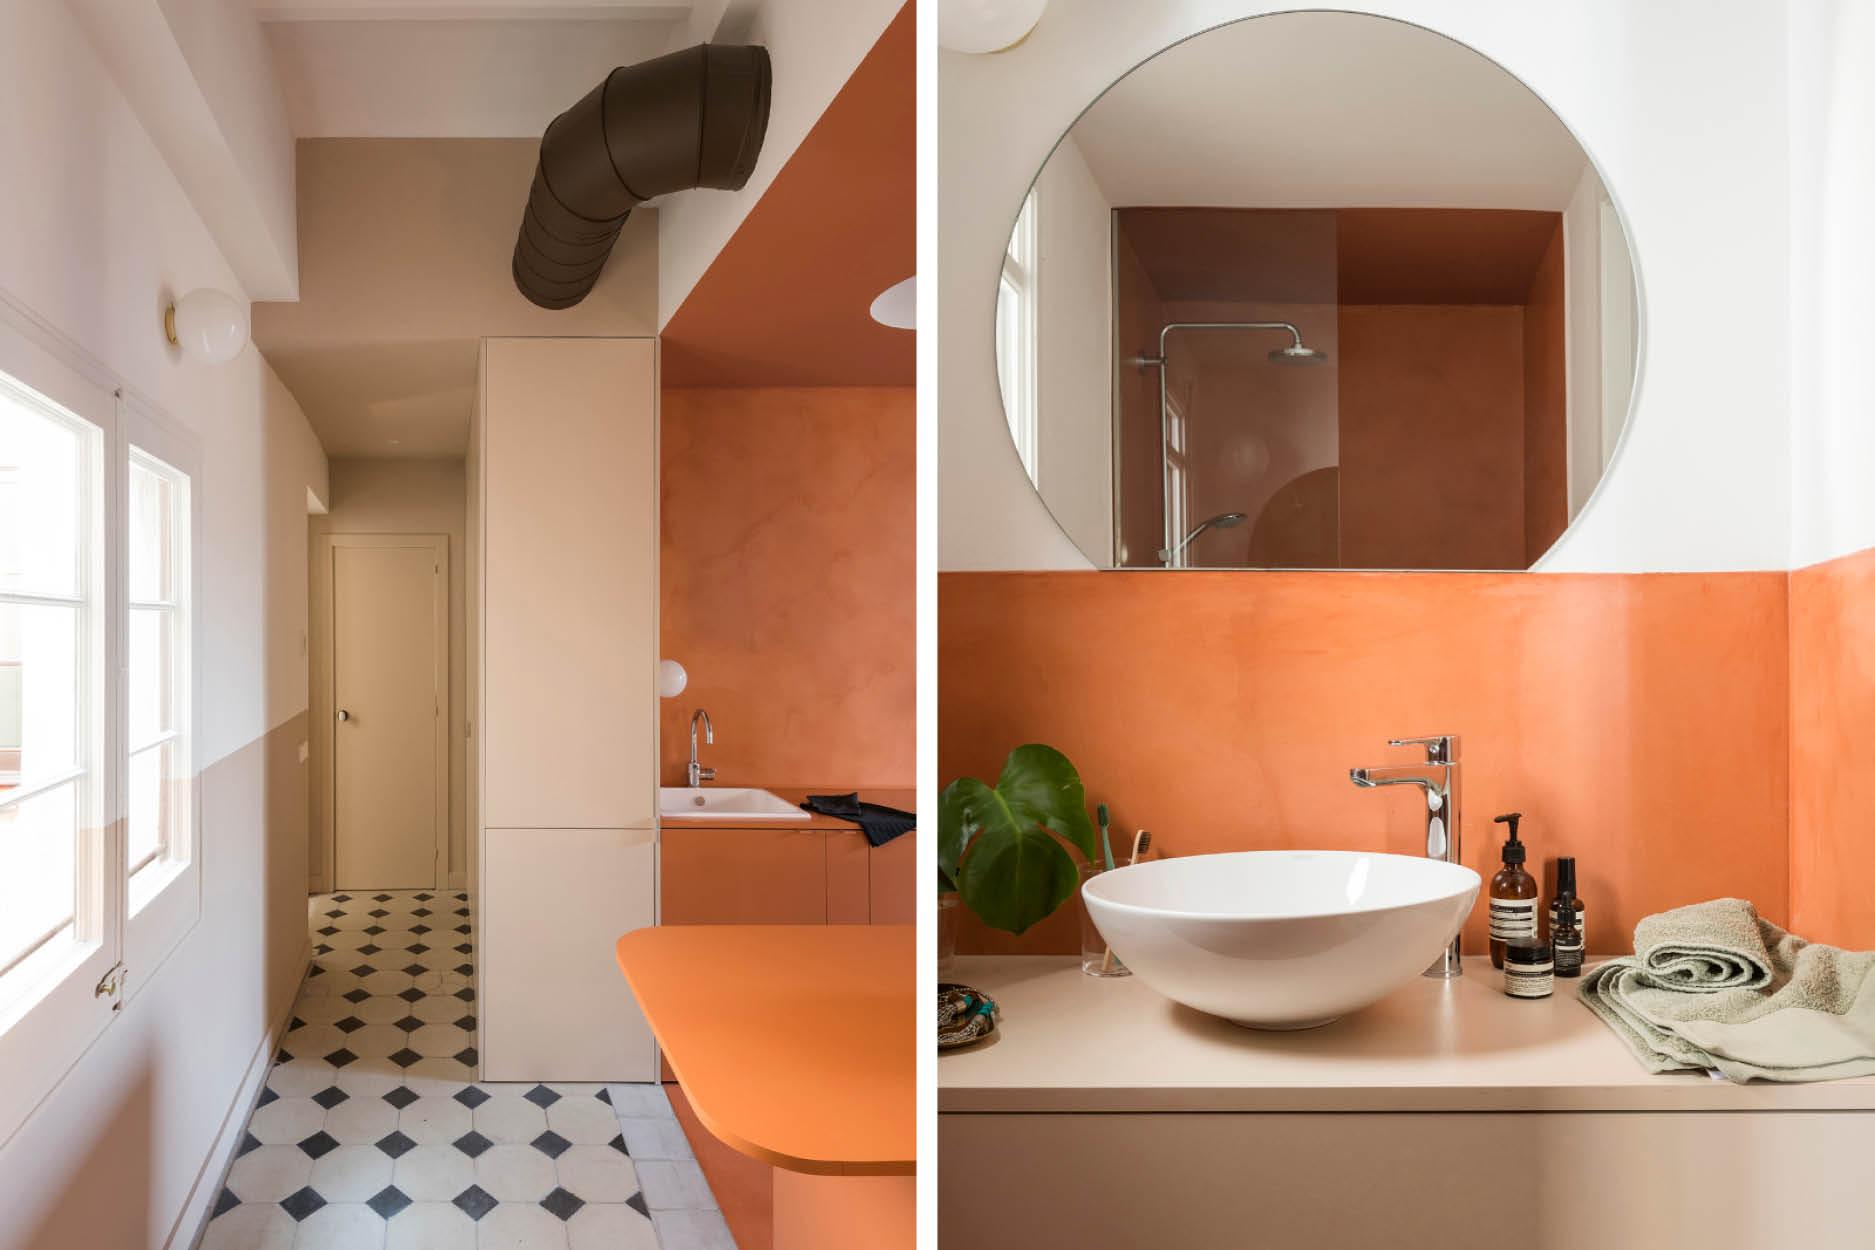 This Apartment is Reborn from Ruins with Contrasting Colour Blocking